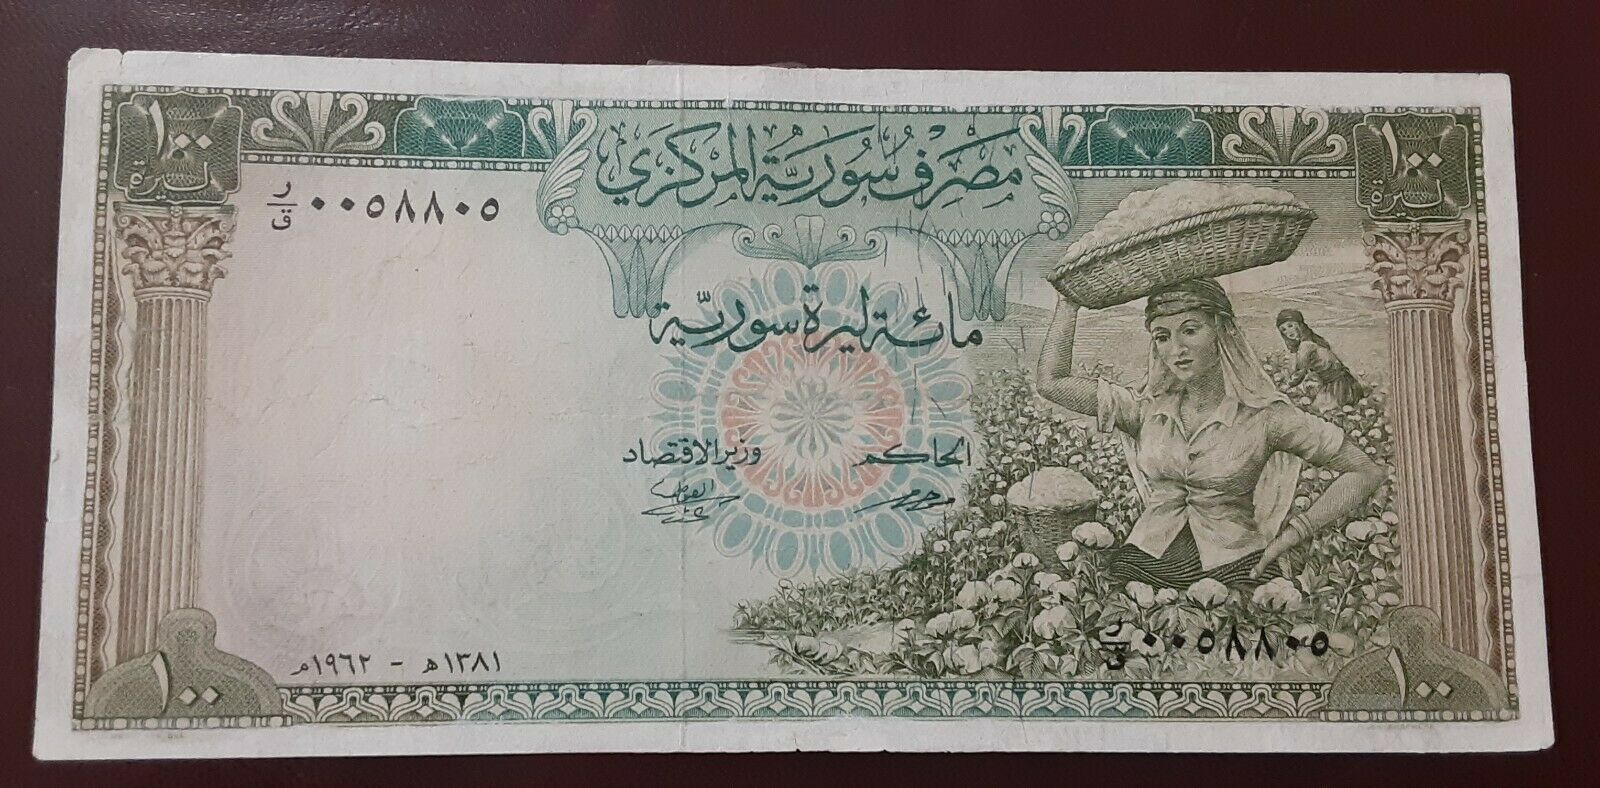 Syria 1962 100 Pounds Banknote